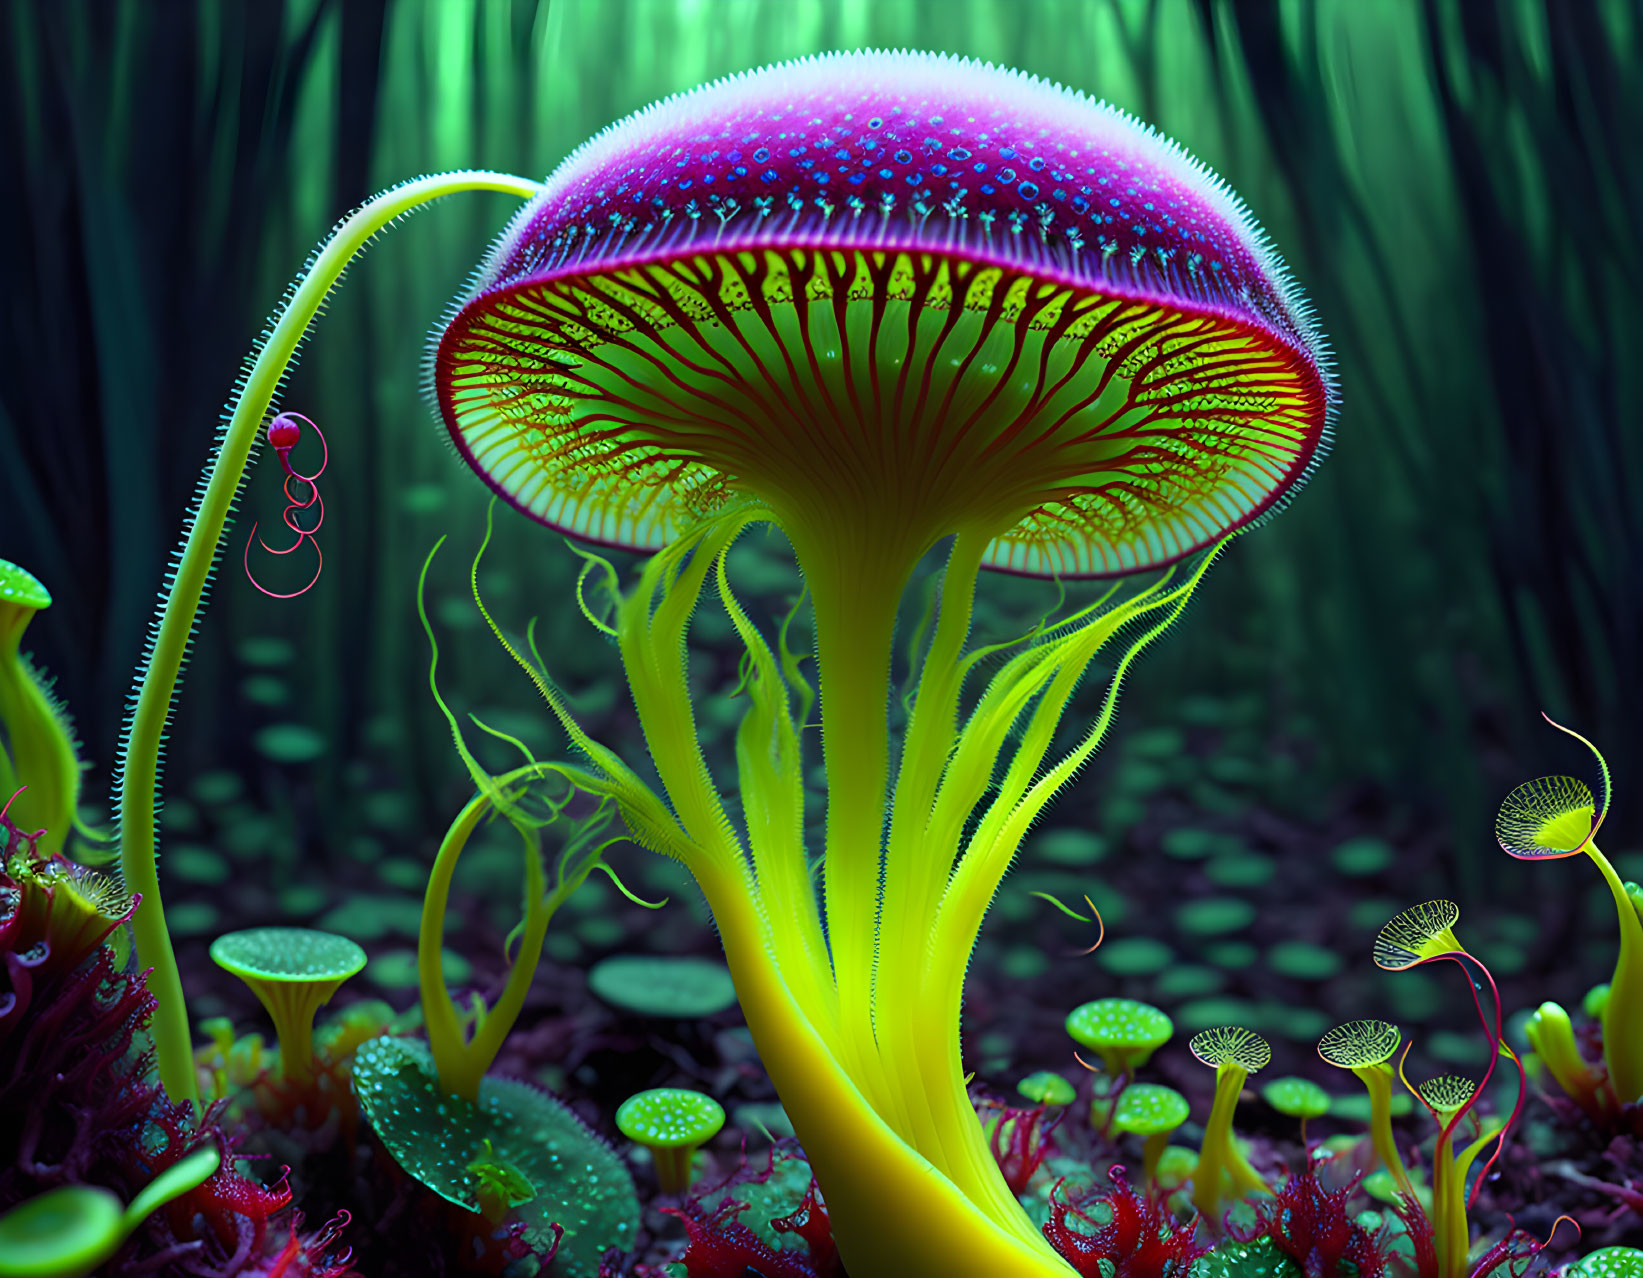 Colorful bioluminescent mushroom in surreal alien forest.